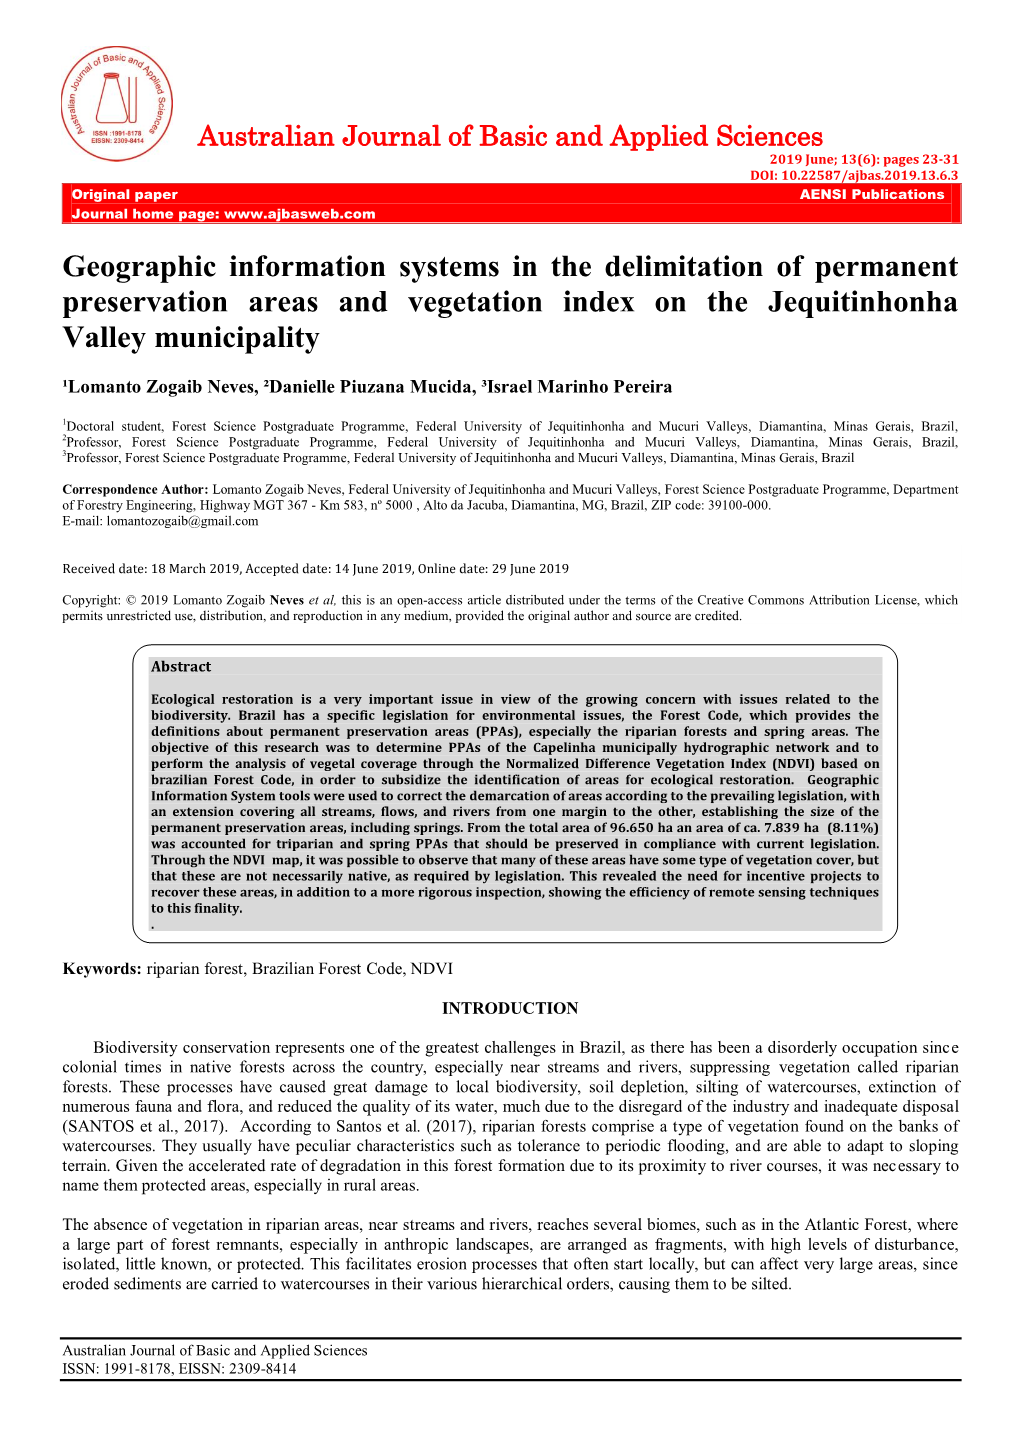 Geographic Information Systems in the Delimitation of Permanent Preservation Areas and Vegetation Index on the Jequitinhonha Valley Municipality